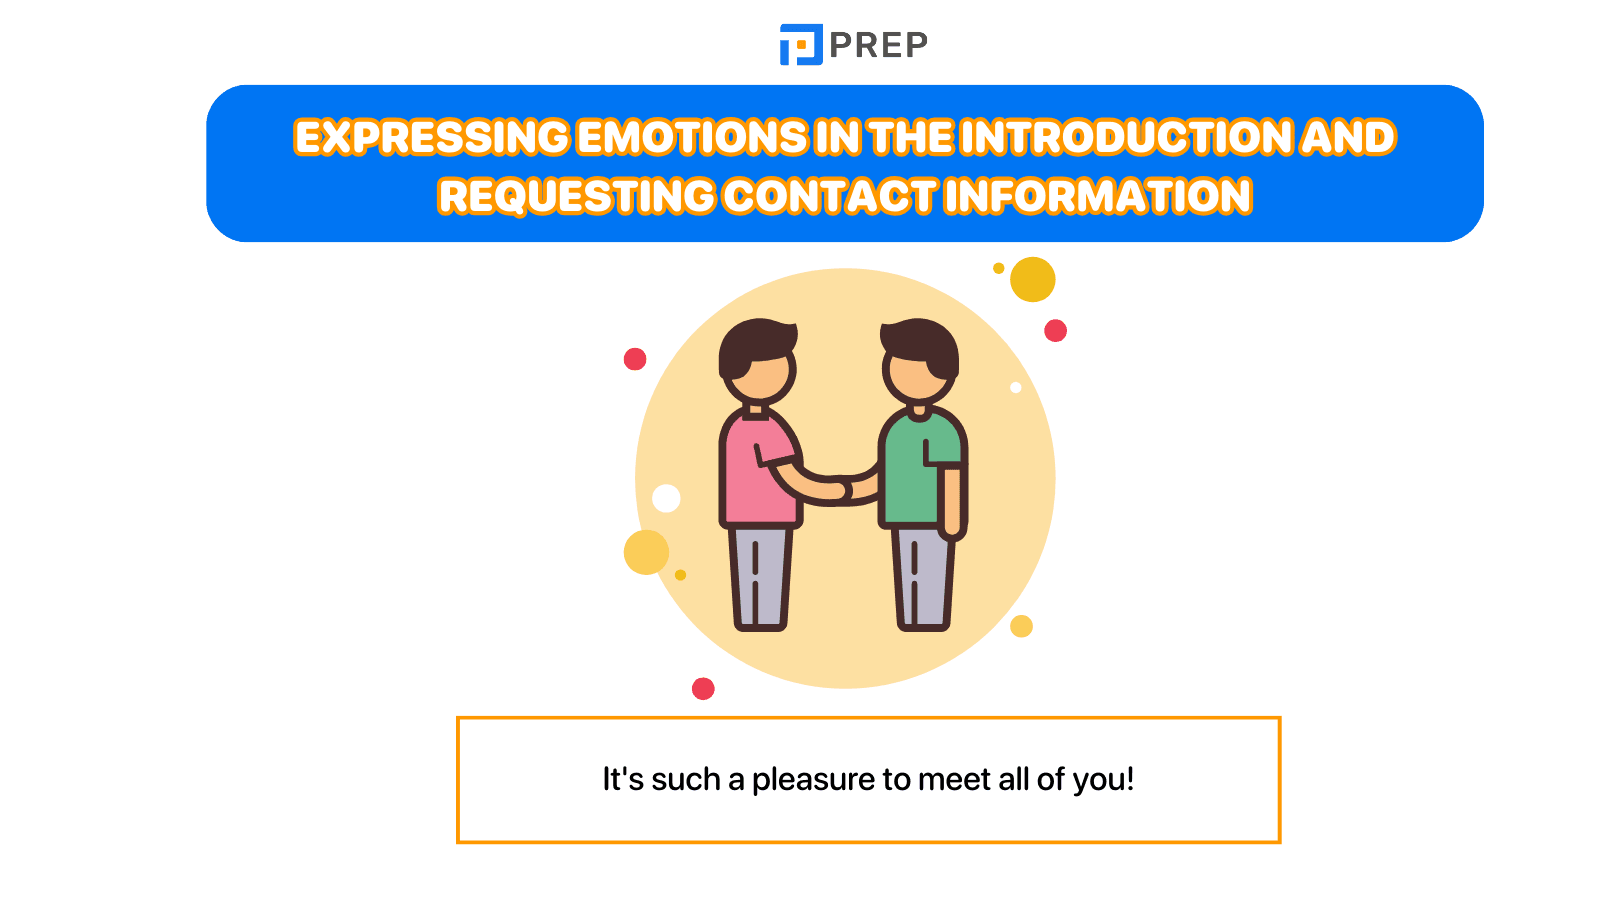 Expressing emotions in the introduction and requesting contact information